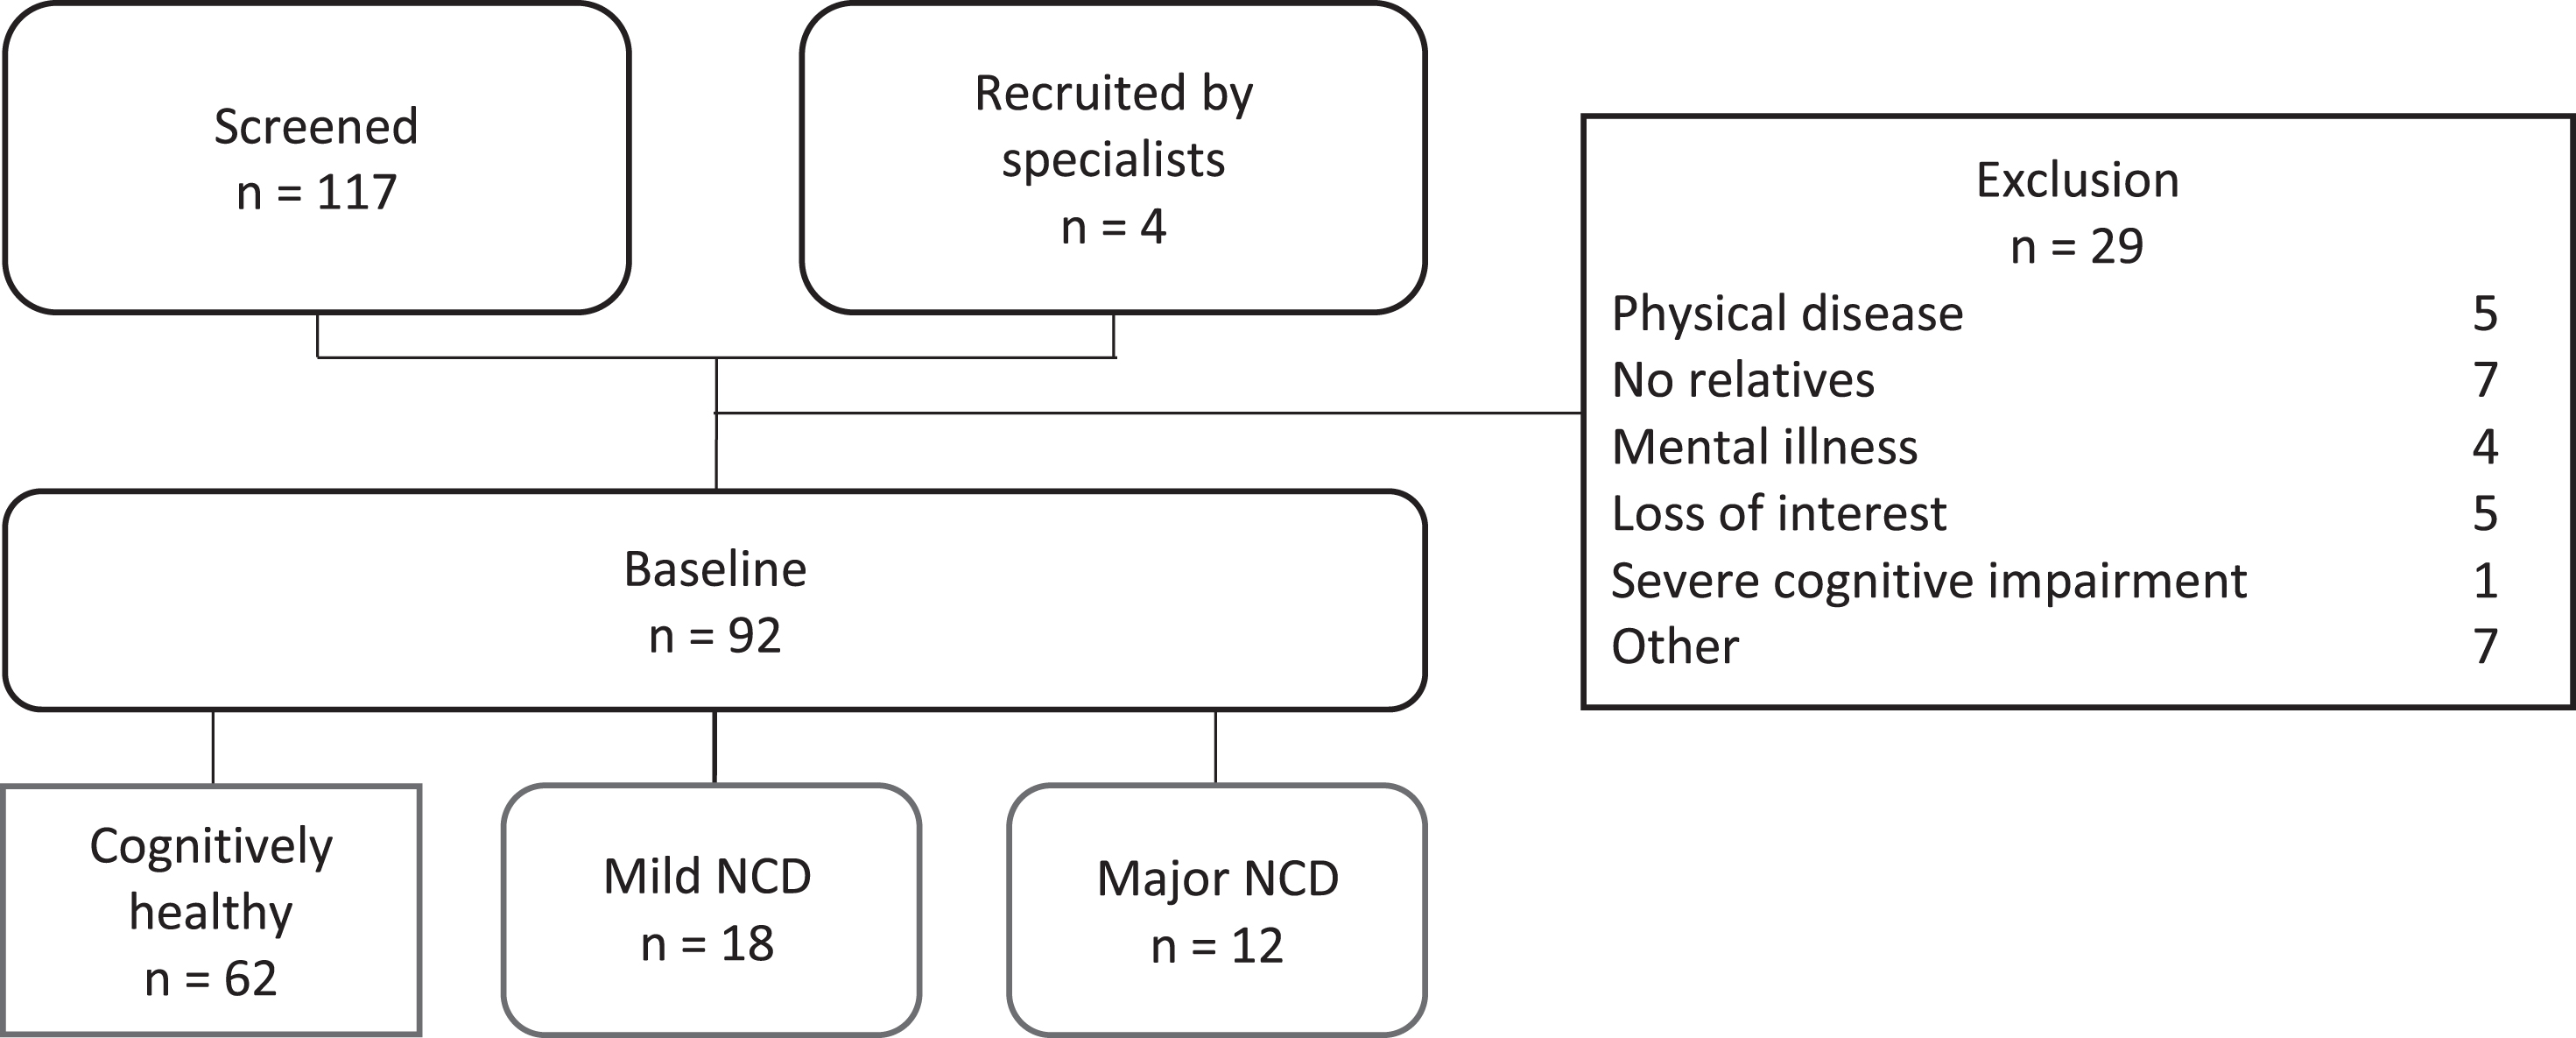 Flowchart –recruitment and analytic sample selection. NCD, neurocognitive disorder.